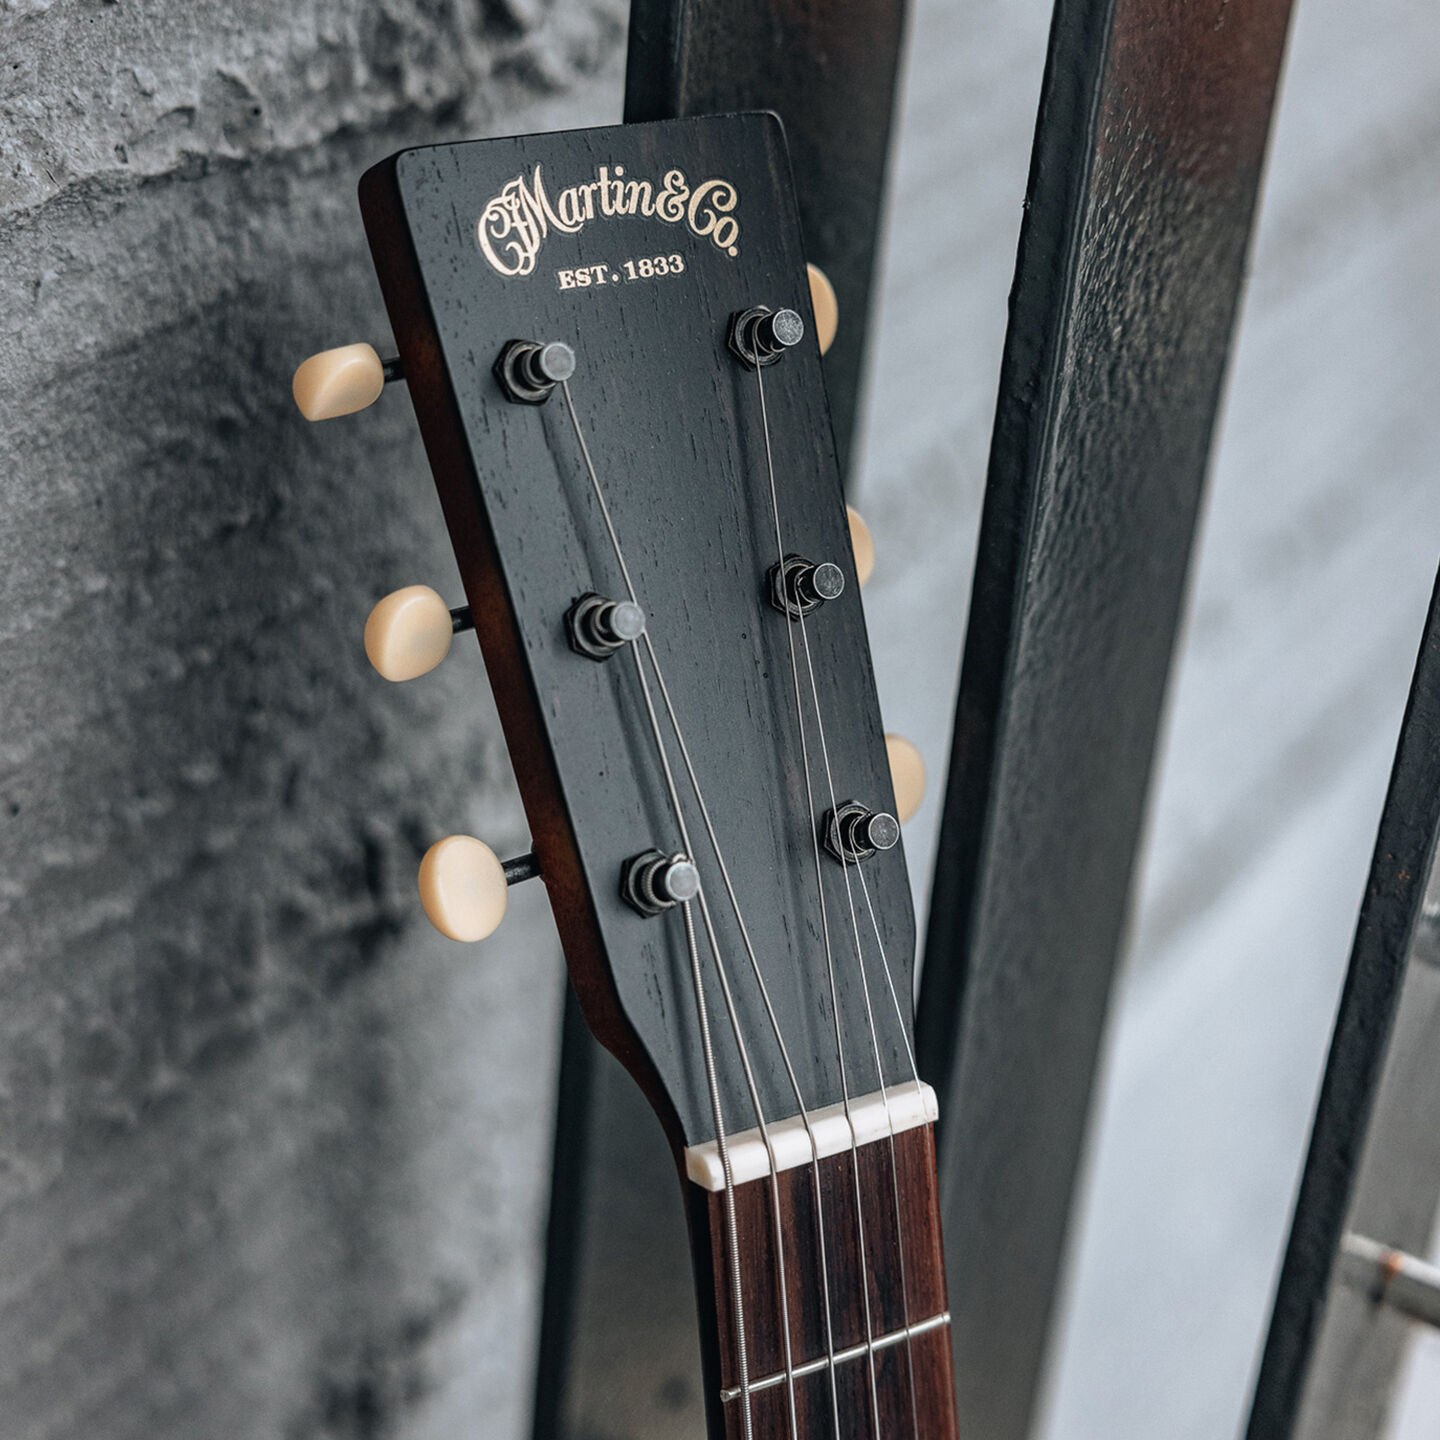 Close up of an acoustic guitar. The headstock is black with ivory white tuners, and the Martin & Co logo is in gold.